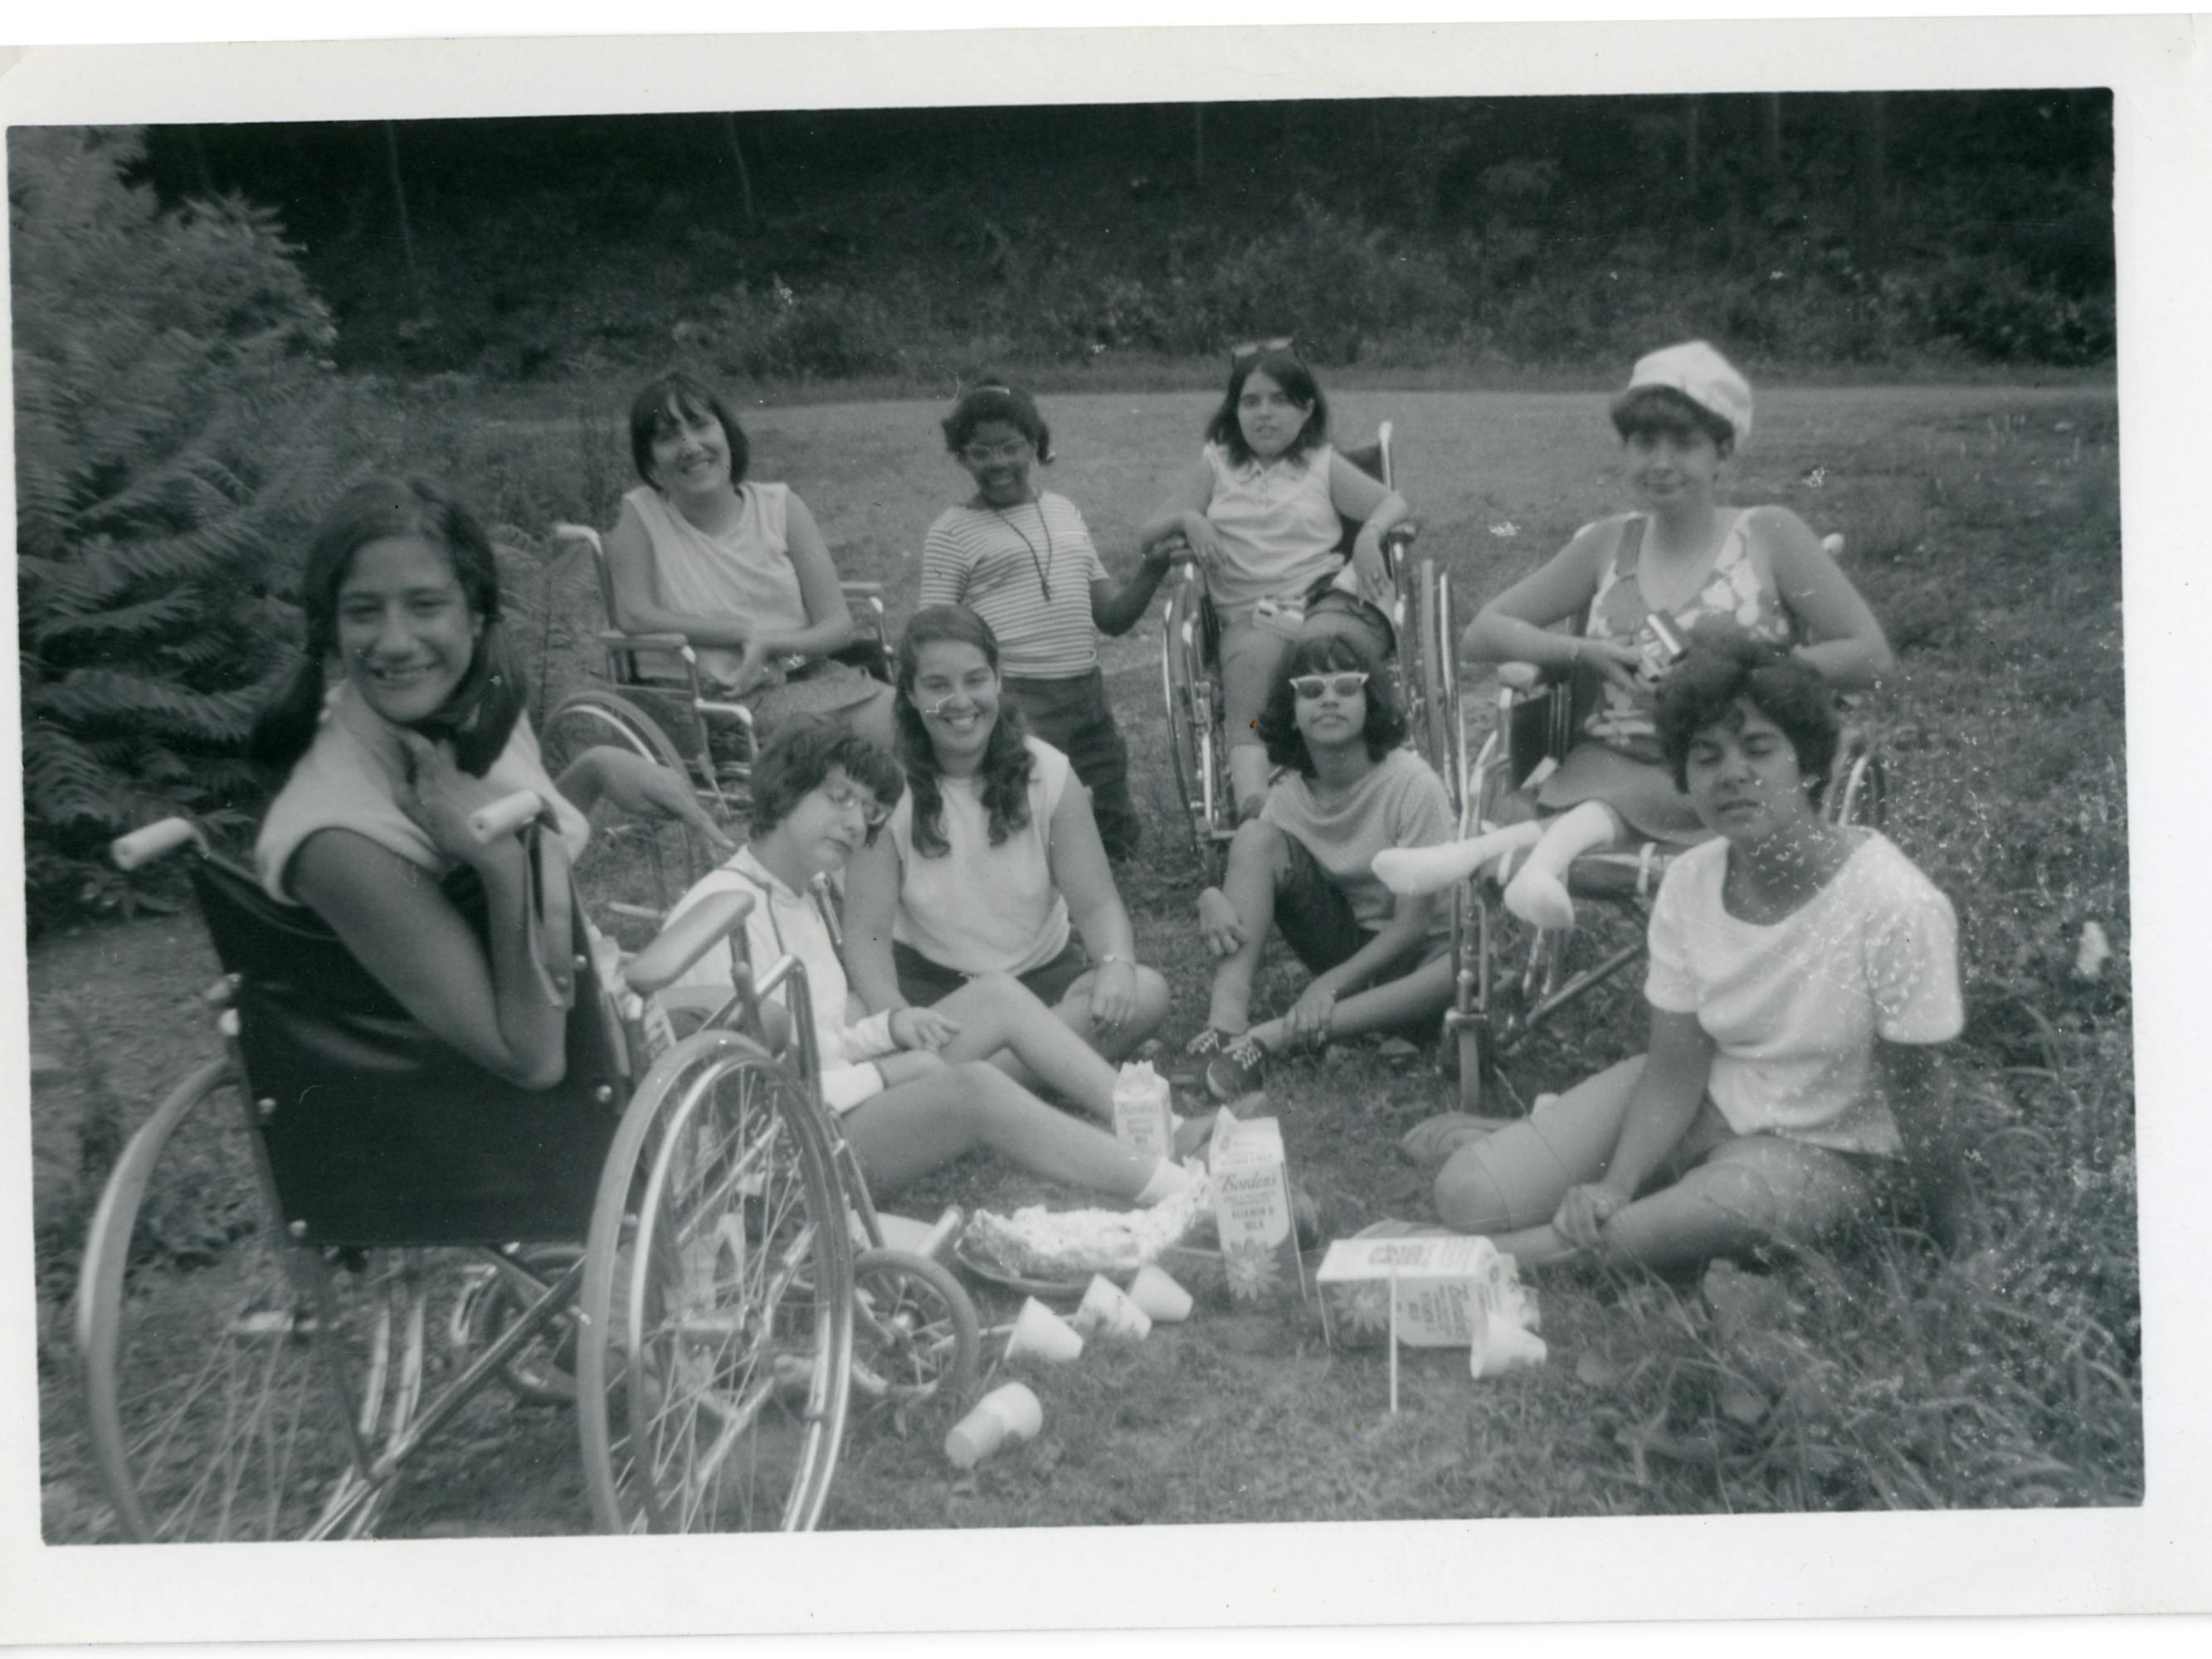 In an old photograph, teens sit in a circle on the grass, enjoying a summer day.